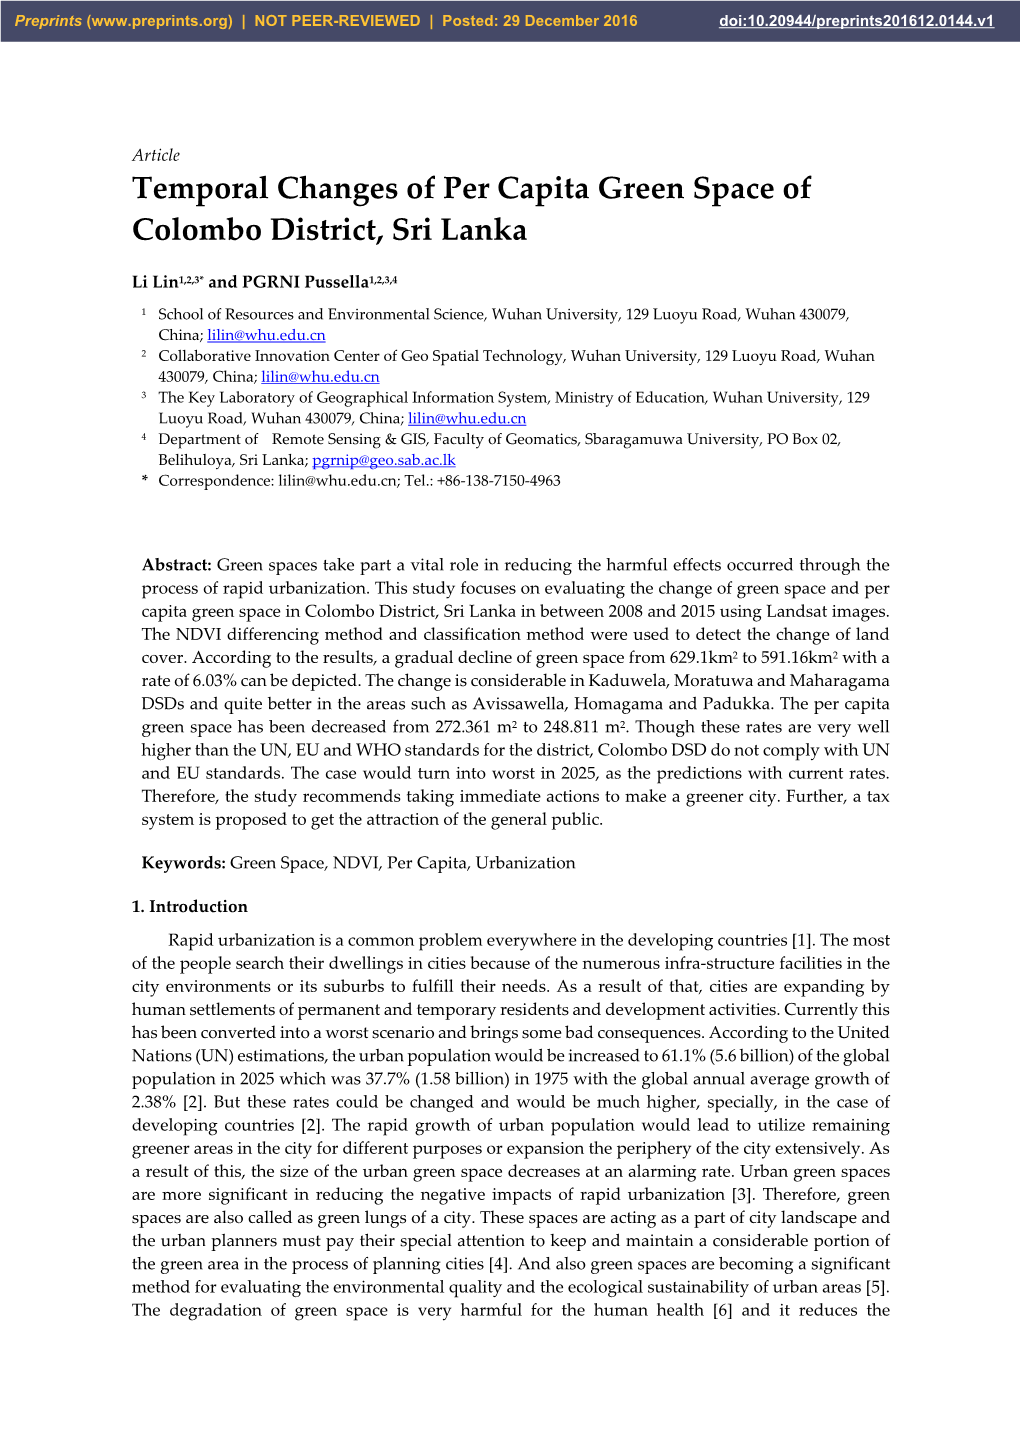 Temporal Changes of Per Capita Green Space of Colombo District, Sri Lanka